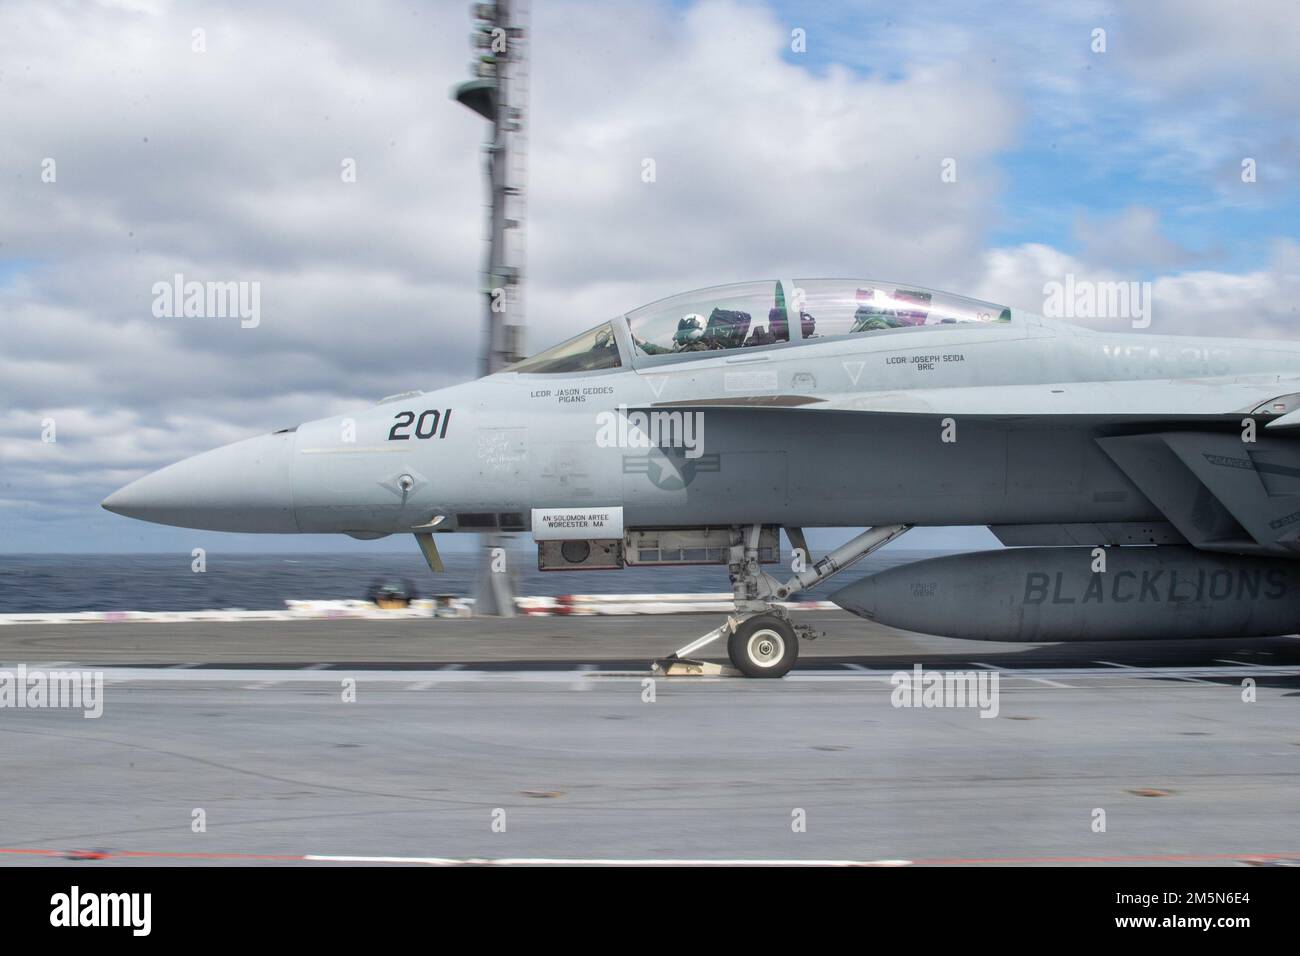 An F/A-18F Super Hornet, attached to the 'Blacklions' of Strike Fighter Squadron (VFA) 213, takes off from USS Gerald R. Ford’s (CVN 78) flight deck, March 29, 2022. Ford is underway in the Atlantic Ocean conducting flight deck certification and air wing carrier qualification as part of the ship’s tailored basic phase prior to operational deployment. Stock Photo